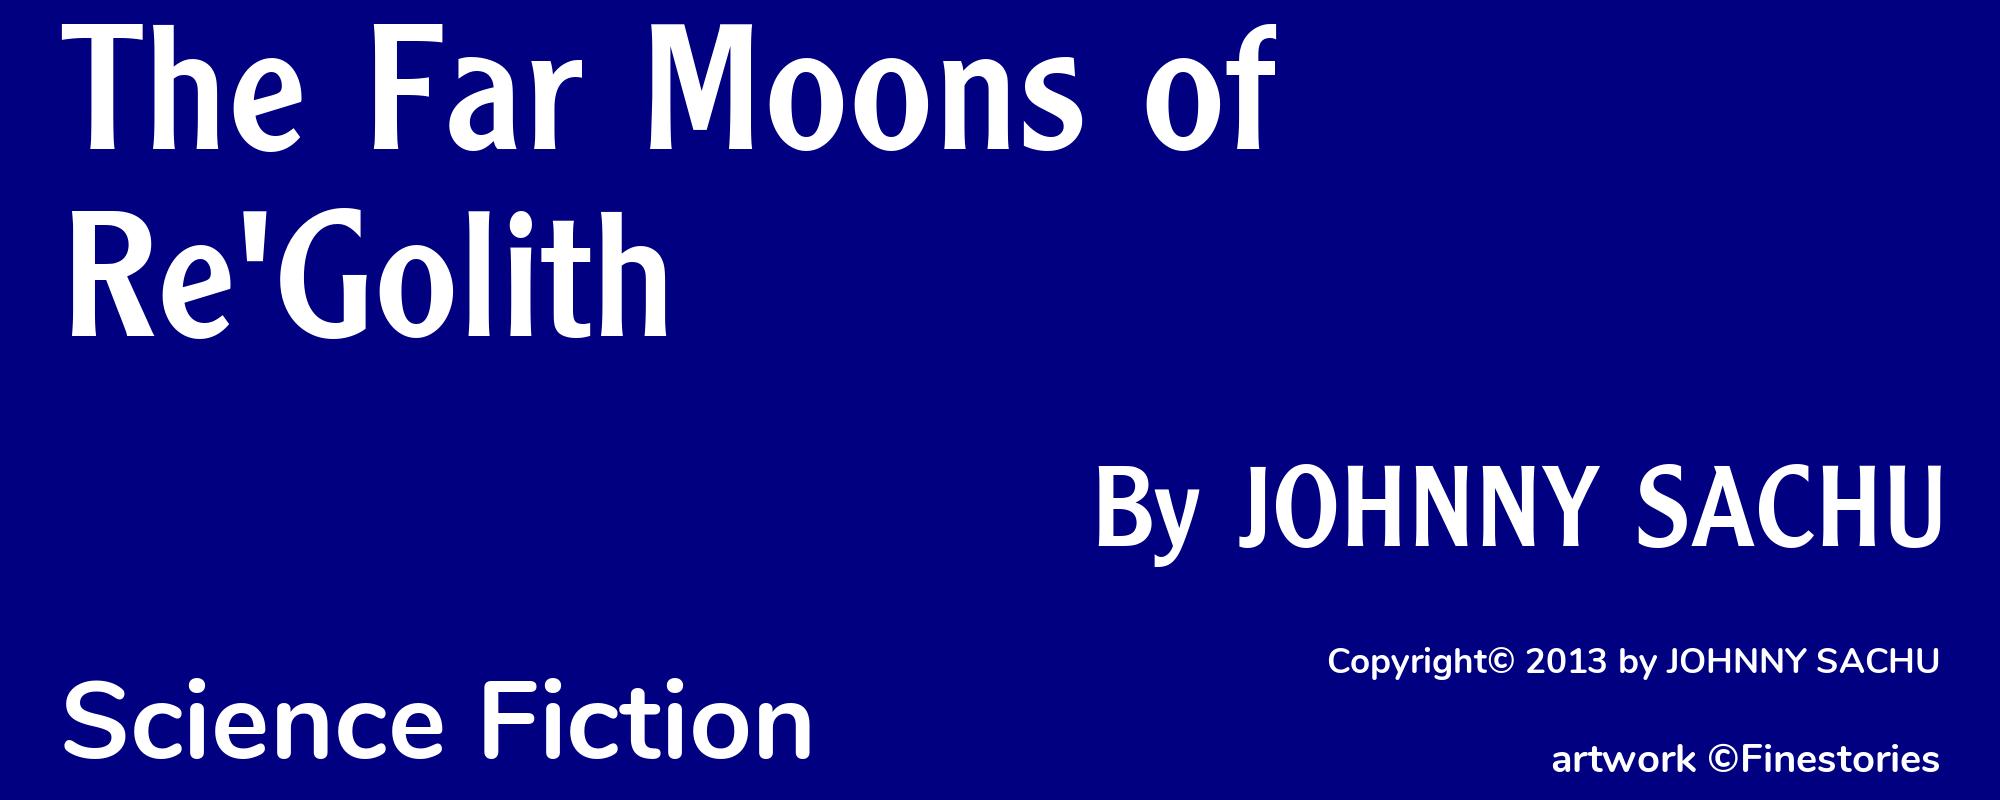 The Far Moons of Re'Golith - Cover